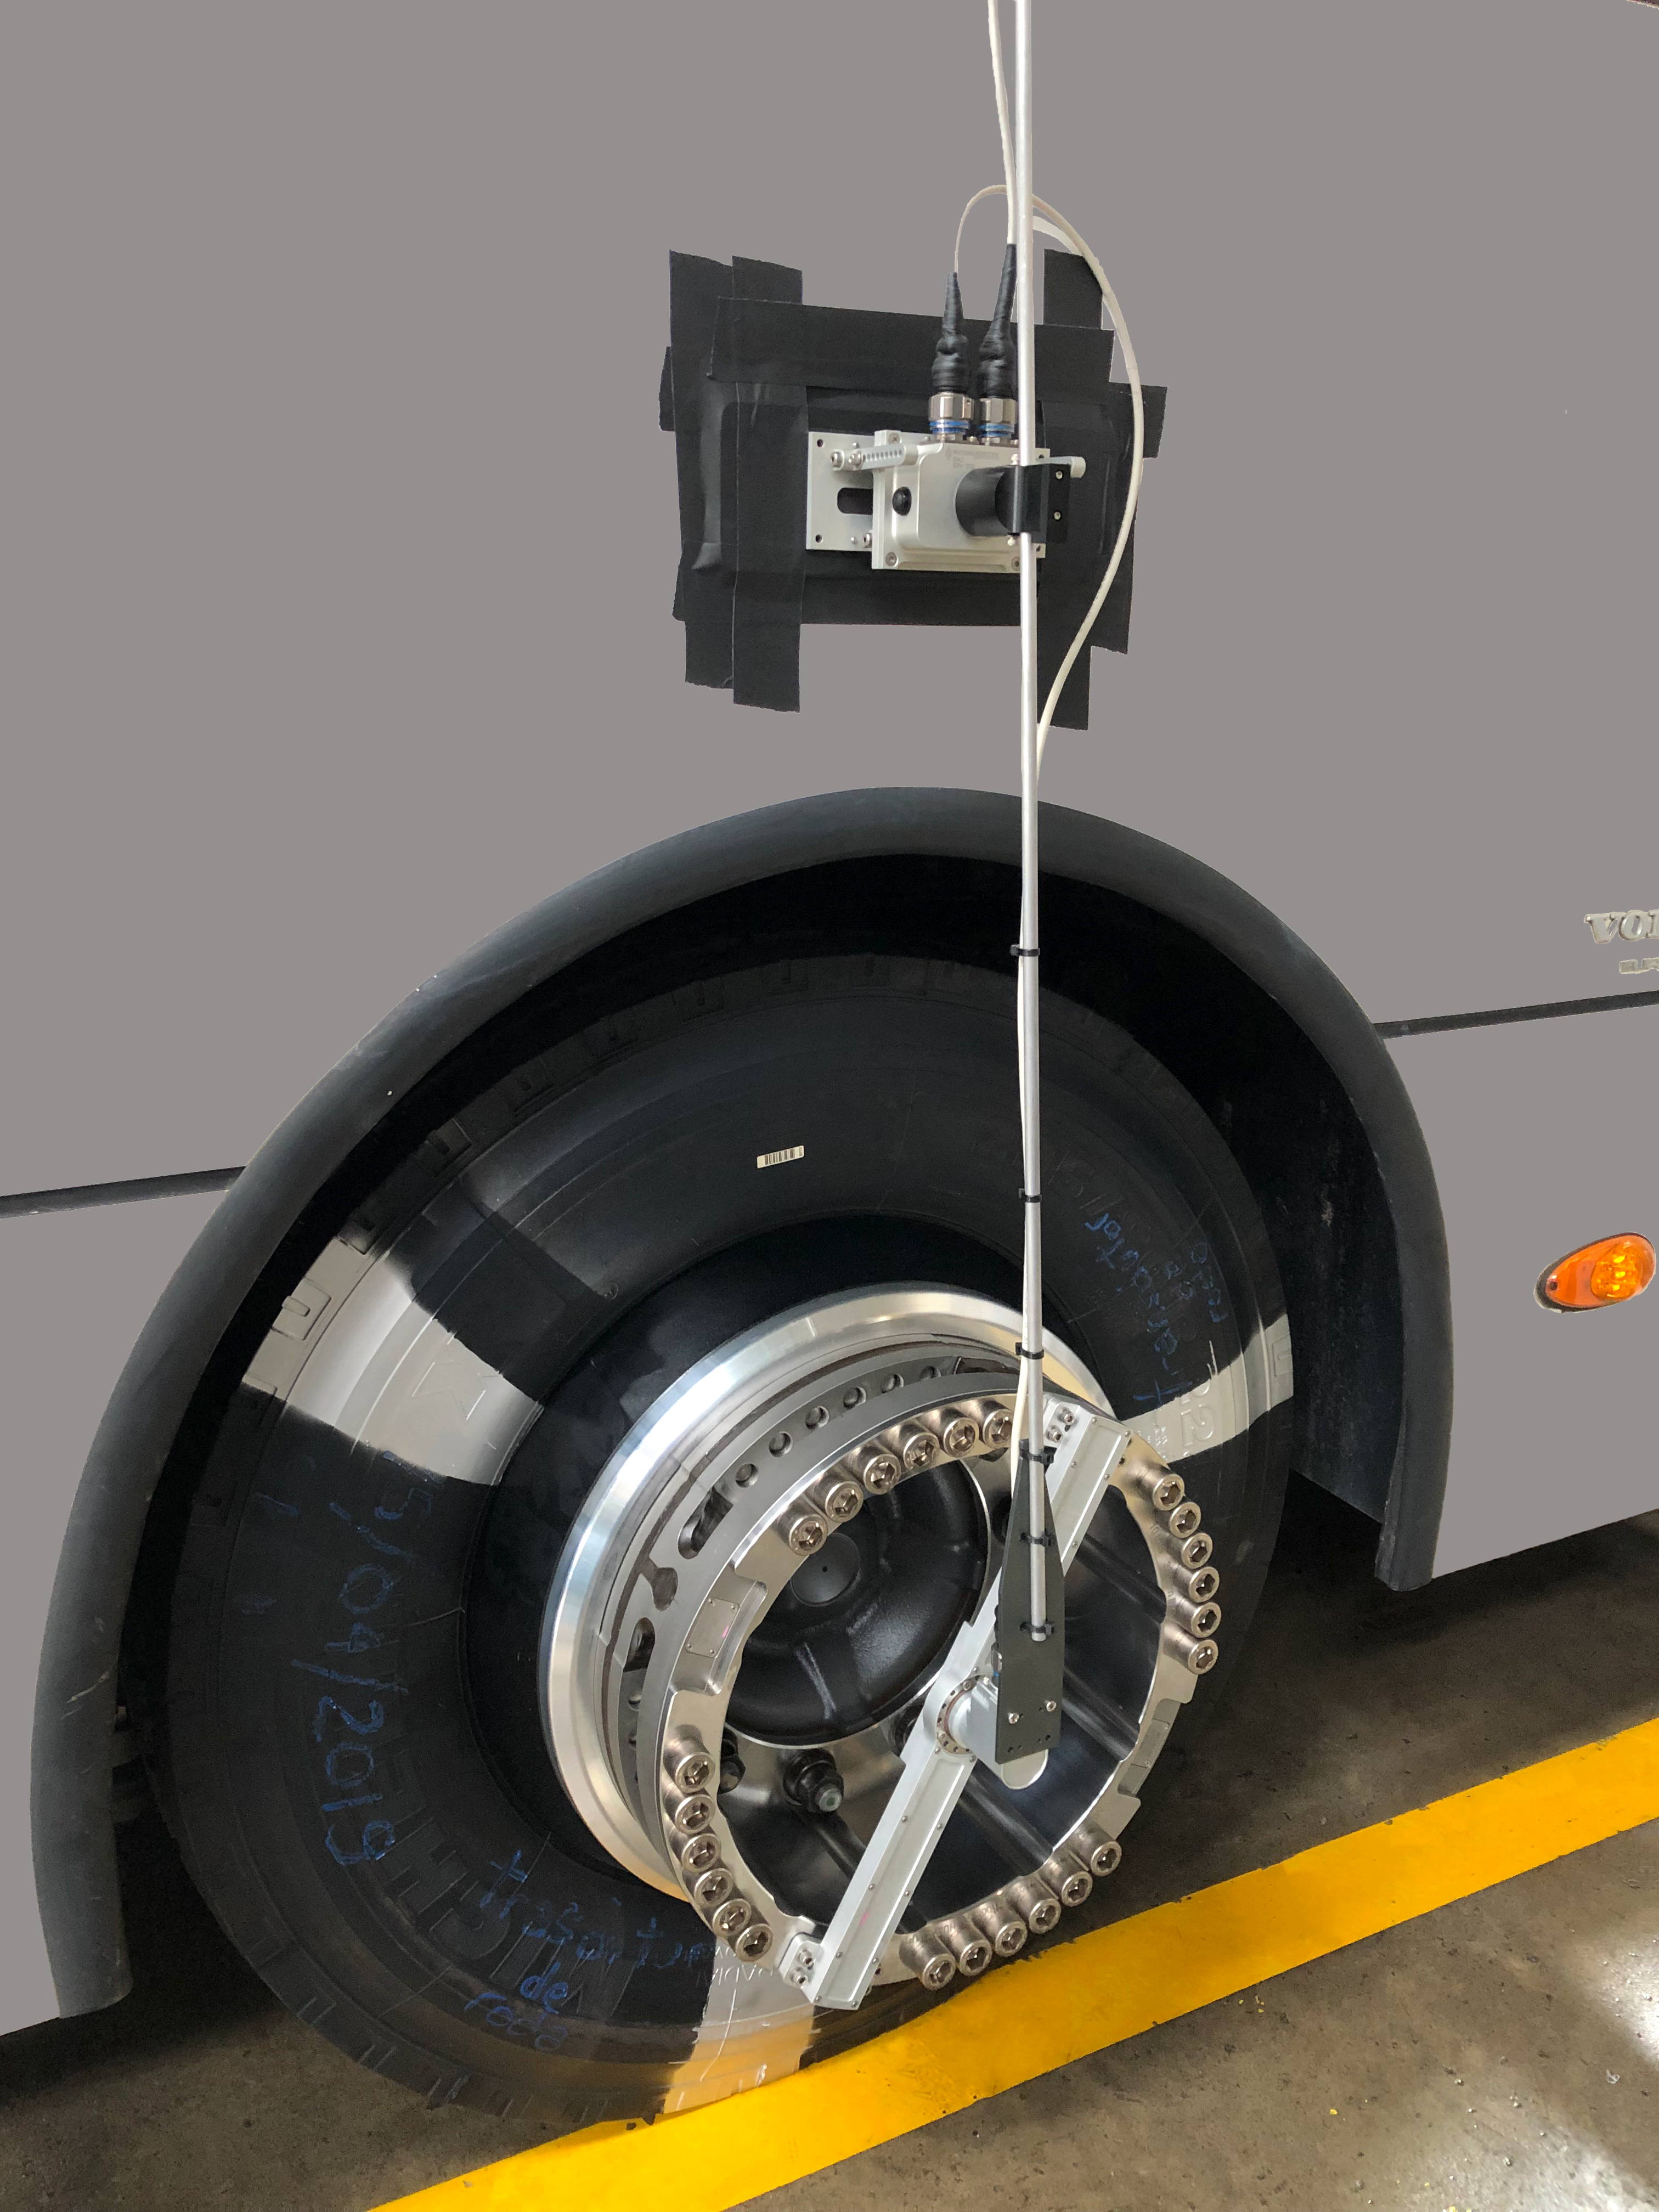 Bus with Wheel Force Transducer